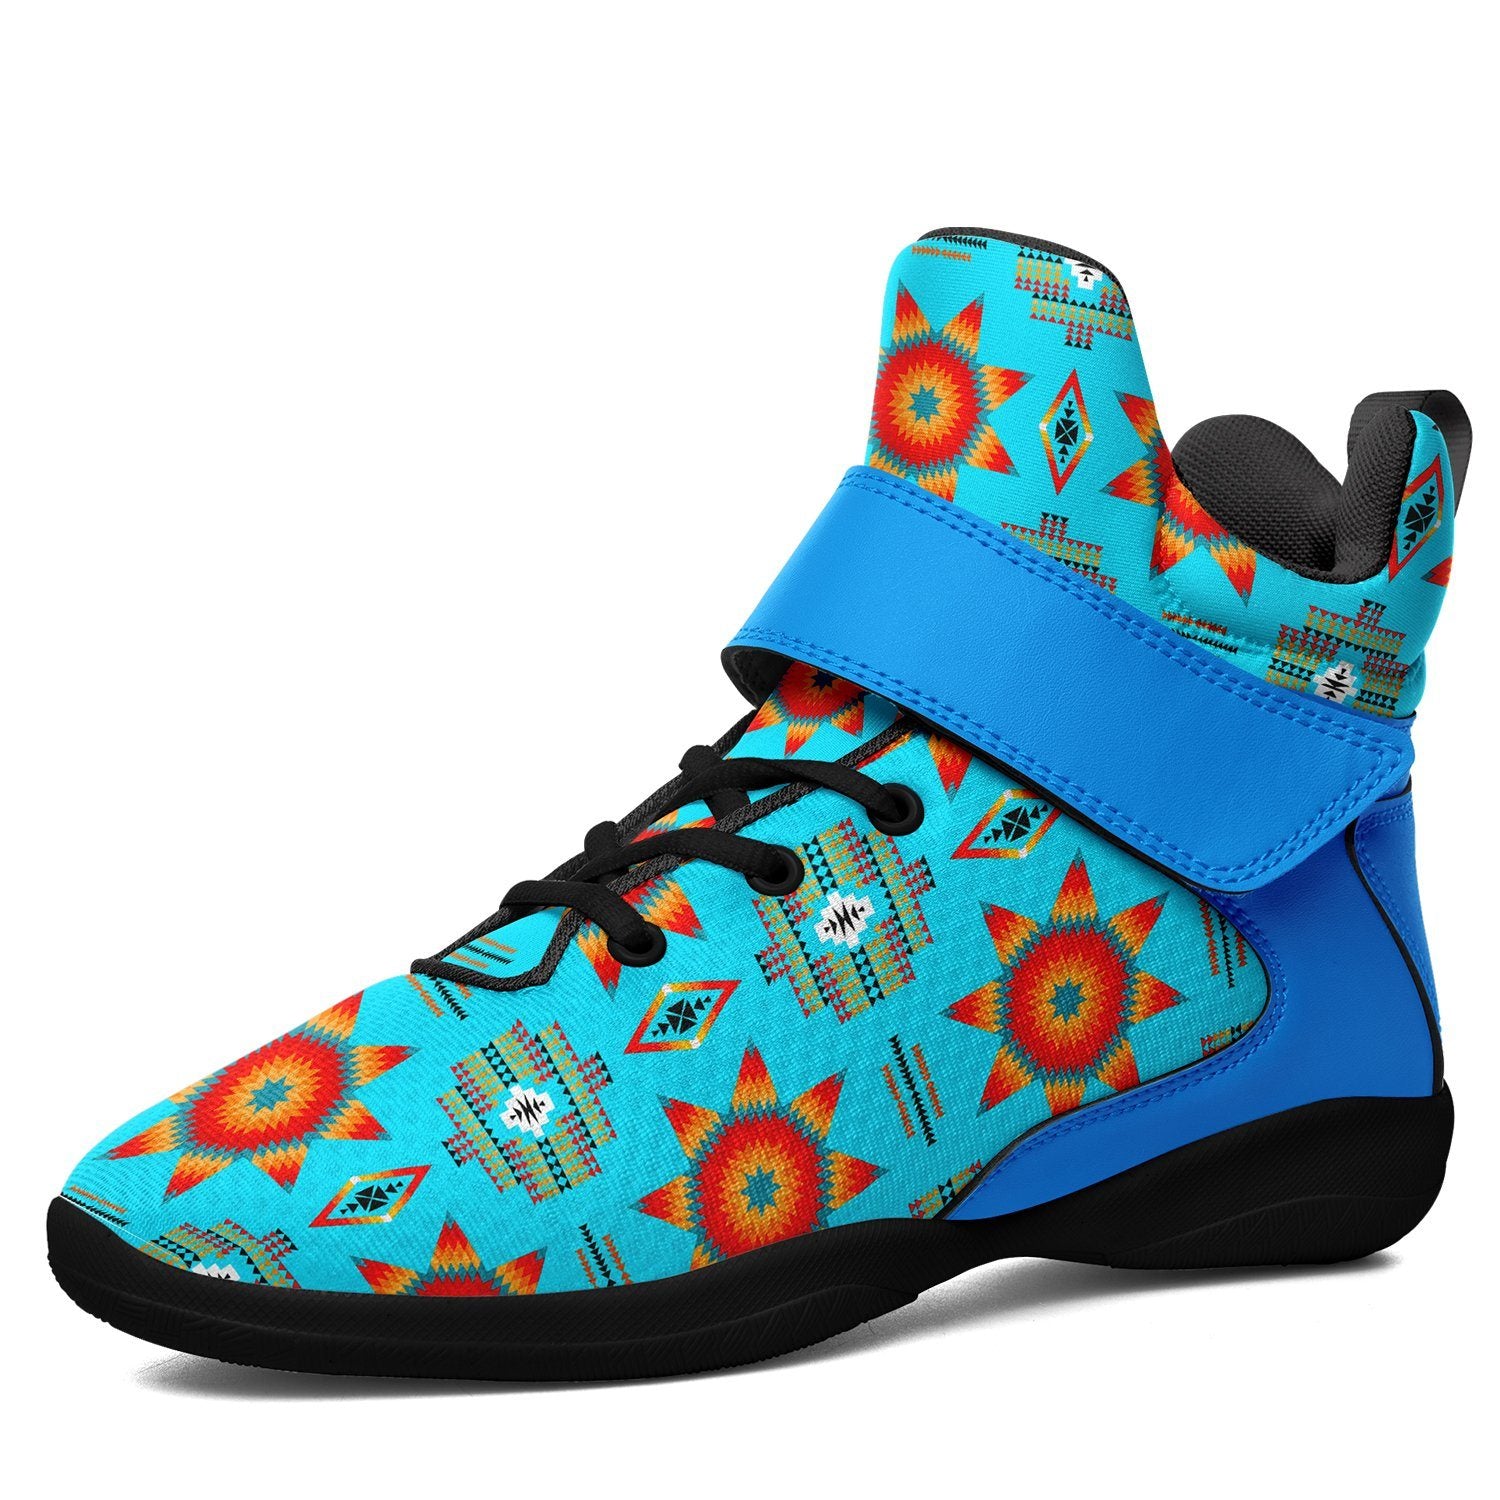 Rising Star Harvest Moon Ipottaa Basketball / Sport High Top Shoes 49 Dzine US Women 4.5 / US Youth 3.5 / EUR 35 Black Sole with Light Blue Strap 